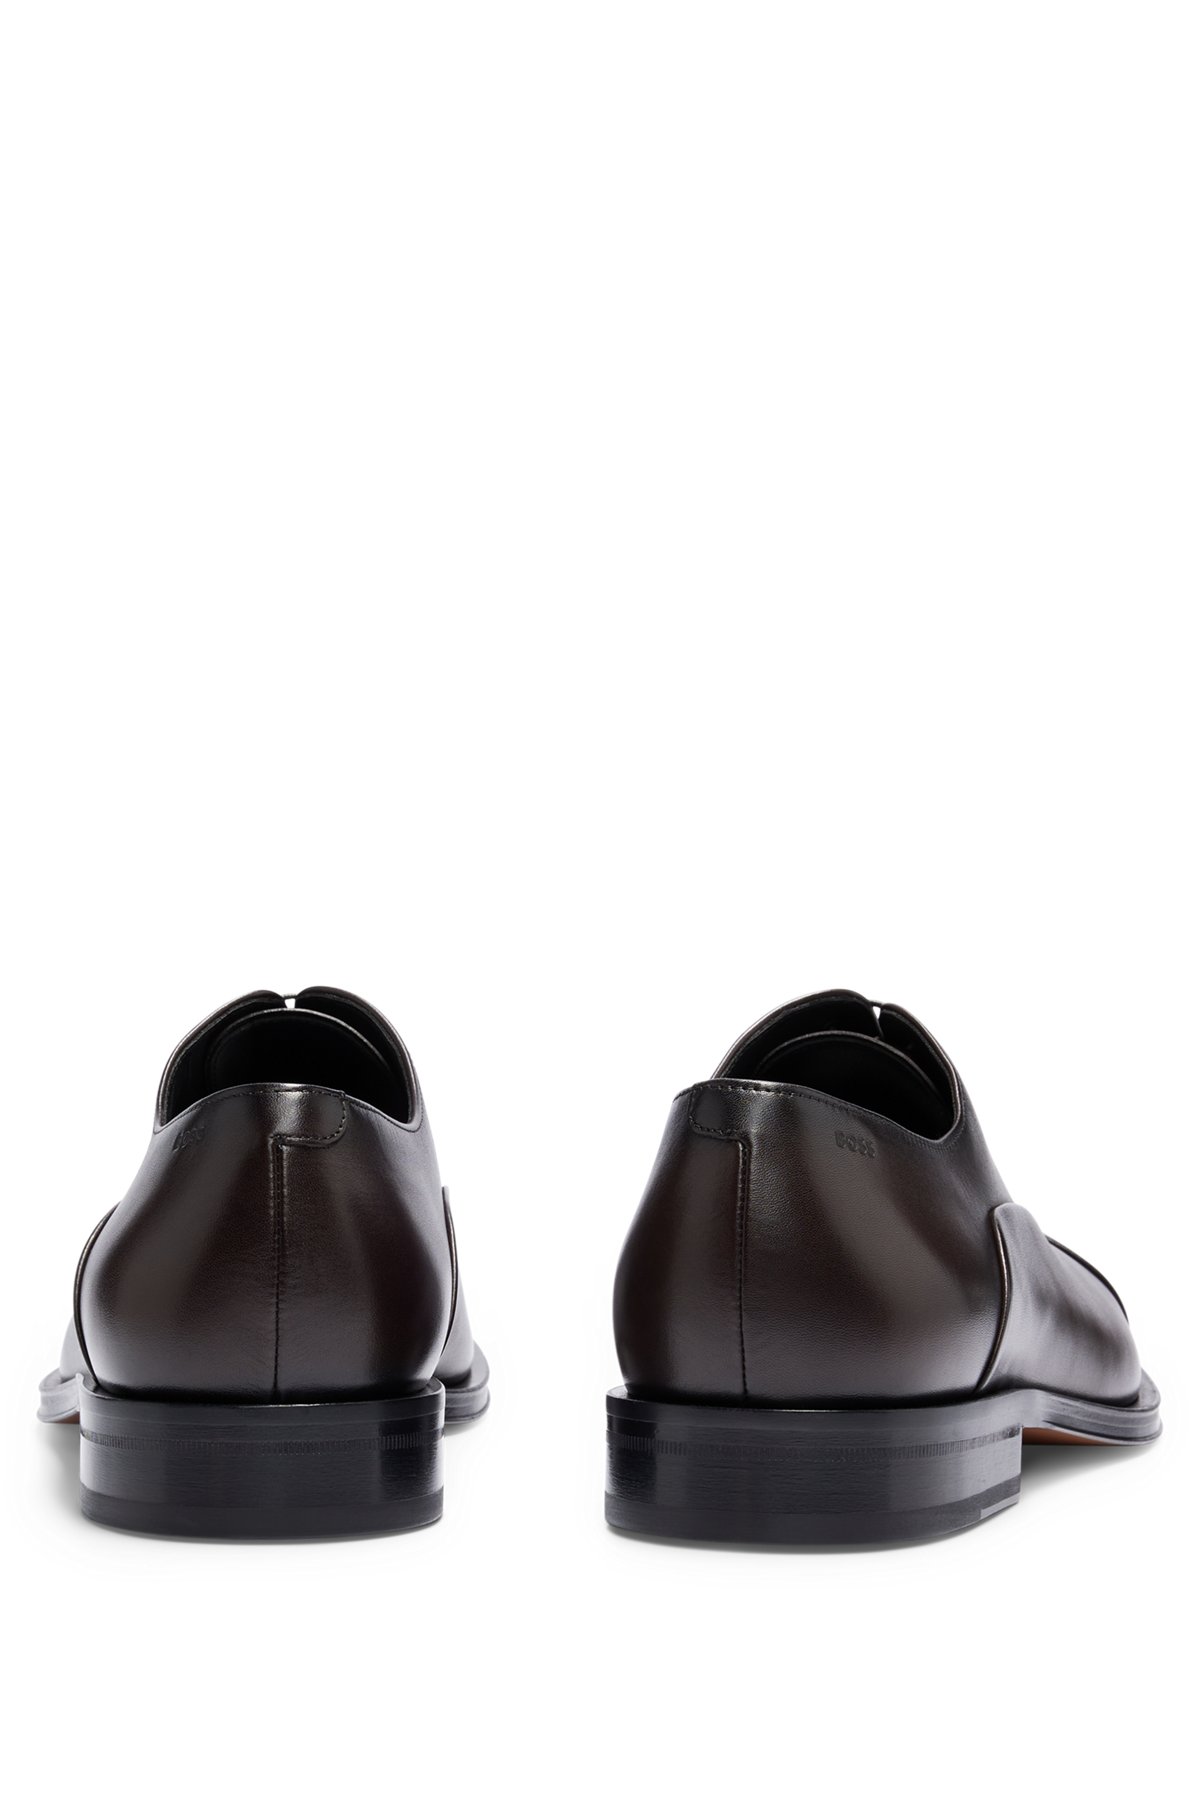 Italian-made leather Oxford shoes with branding, Dark Brown